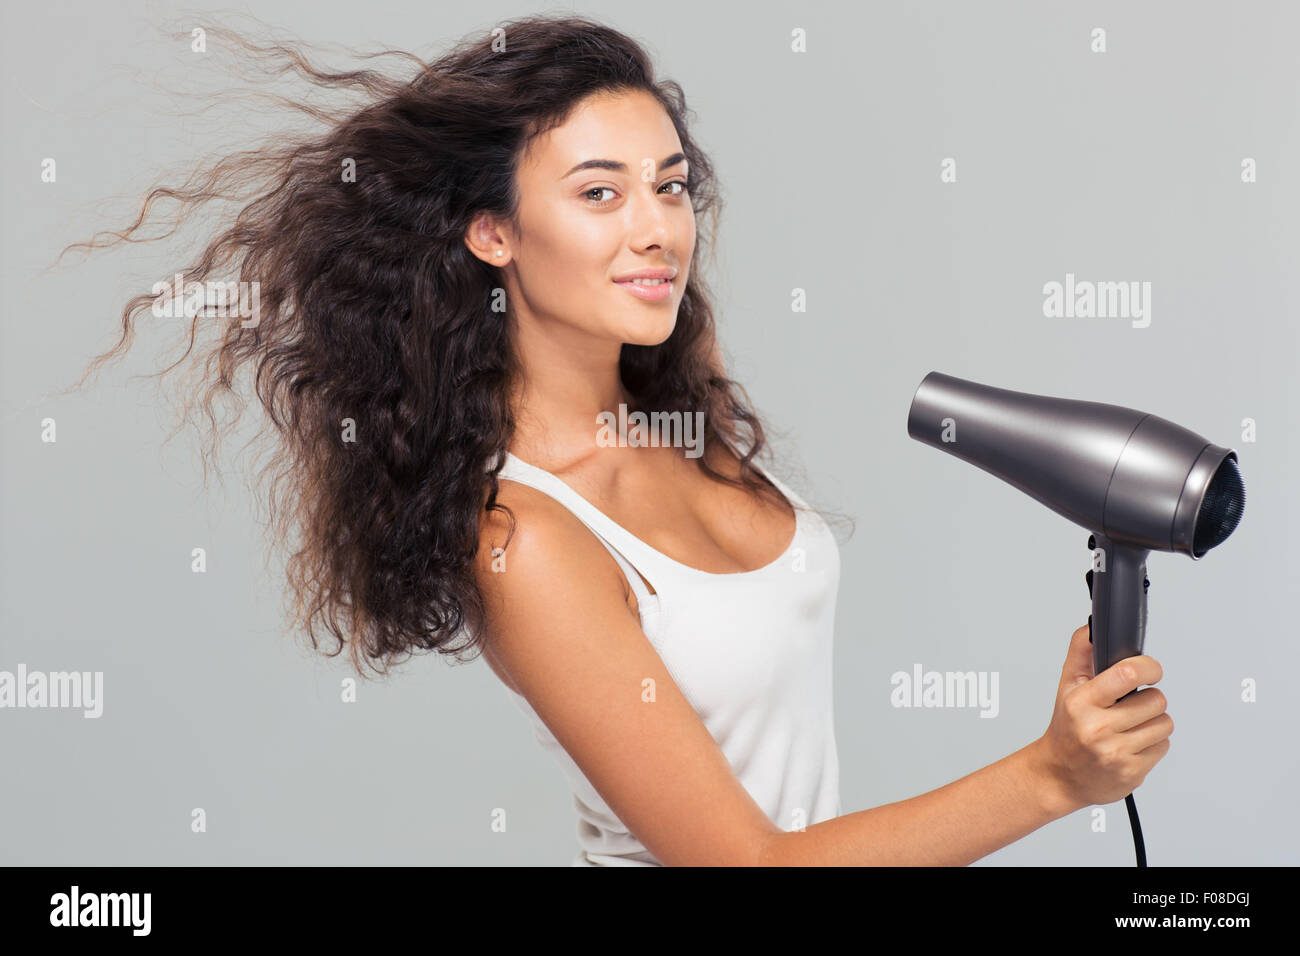 Portrait of a smiling young woman dries her hair over gray background Stock Photo